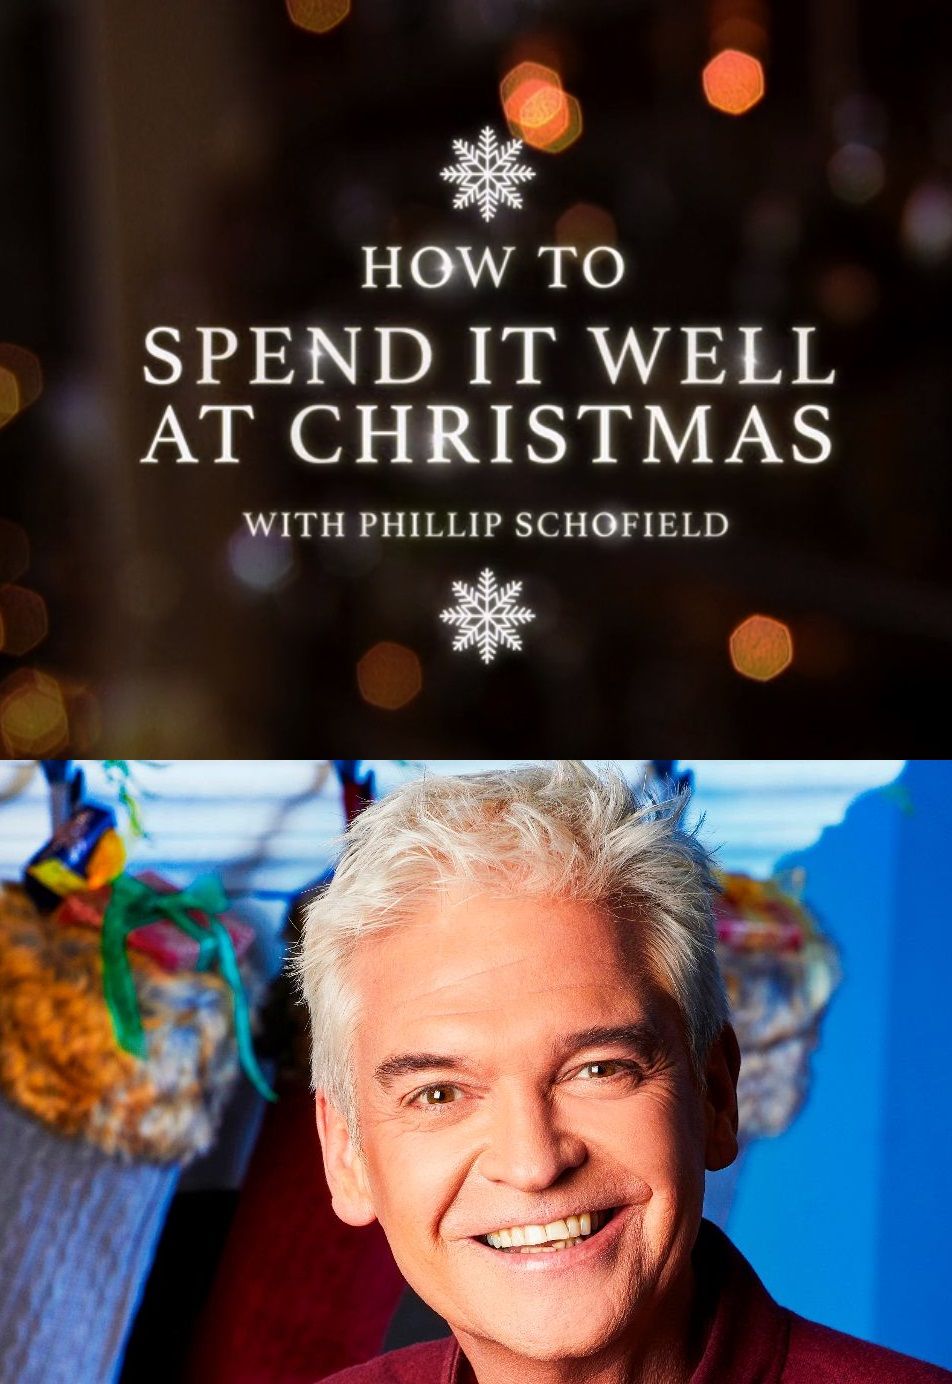 How to Spend It Well at Christmas with Phillip Schofield ne zaman